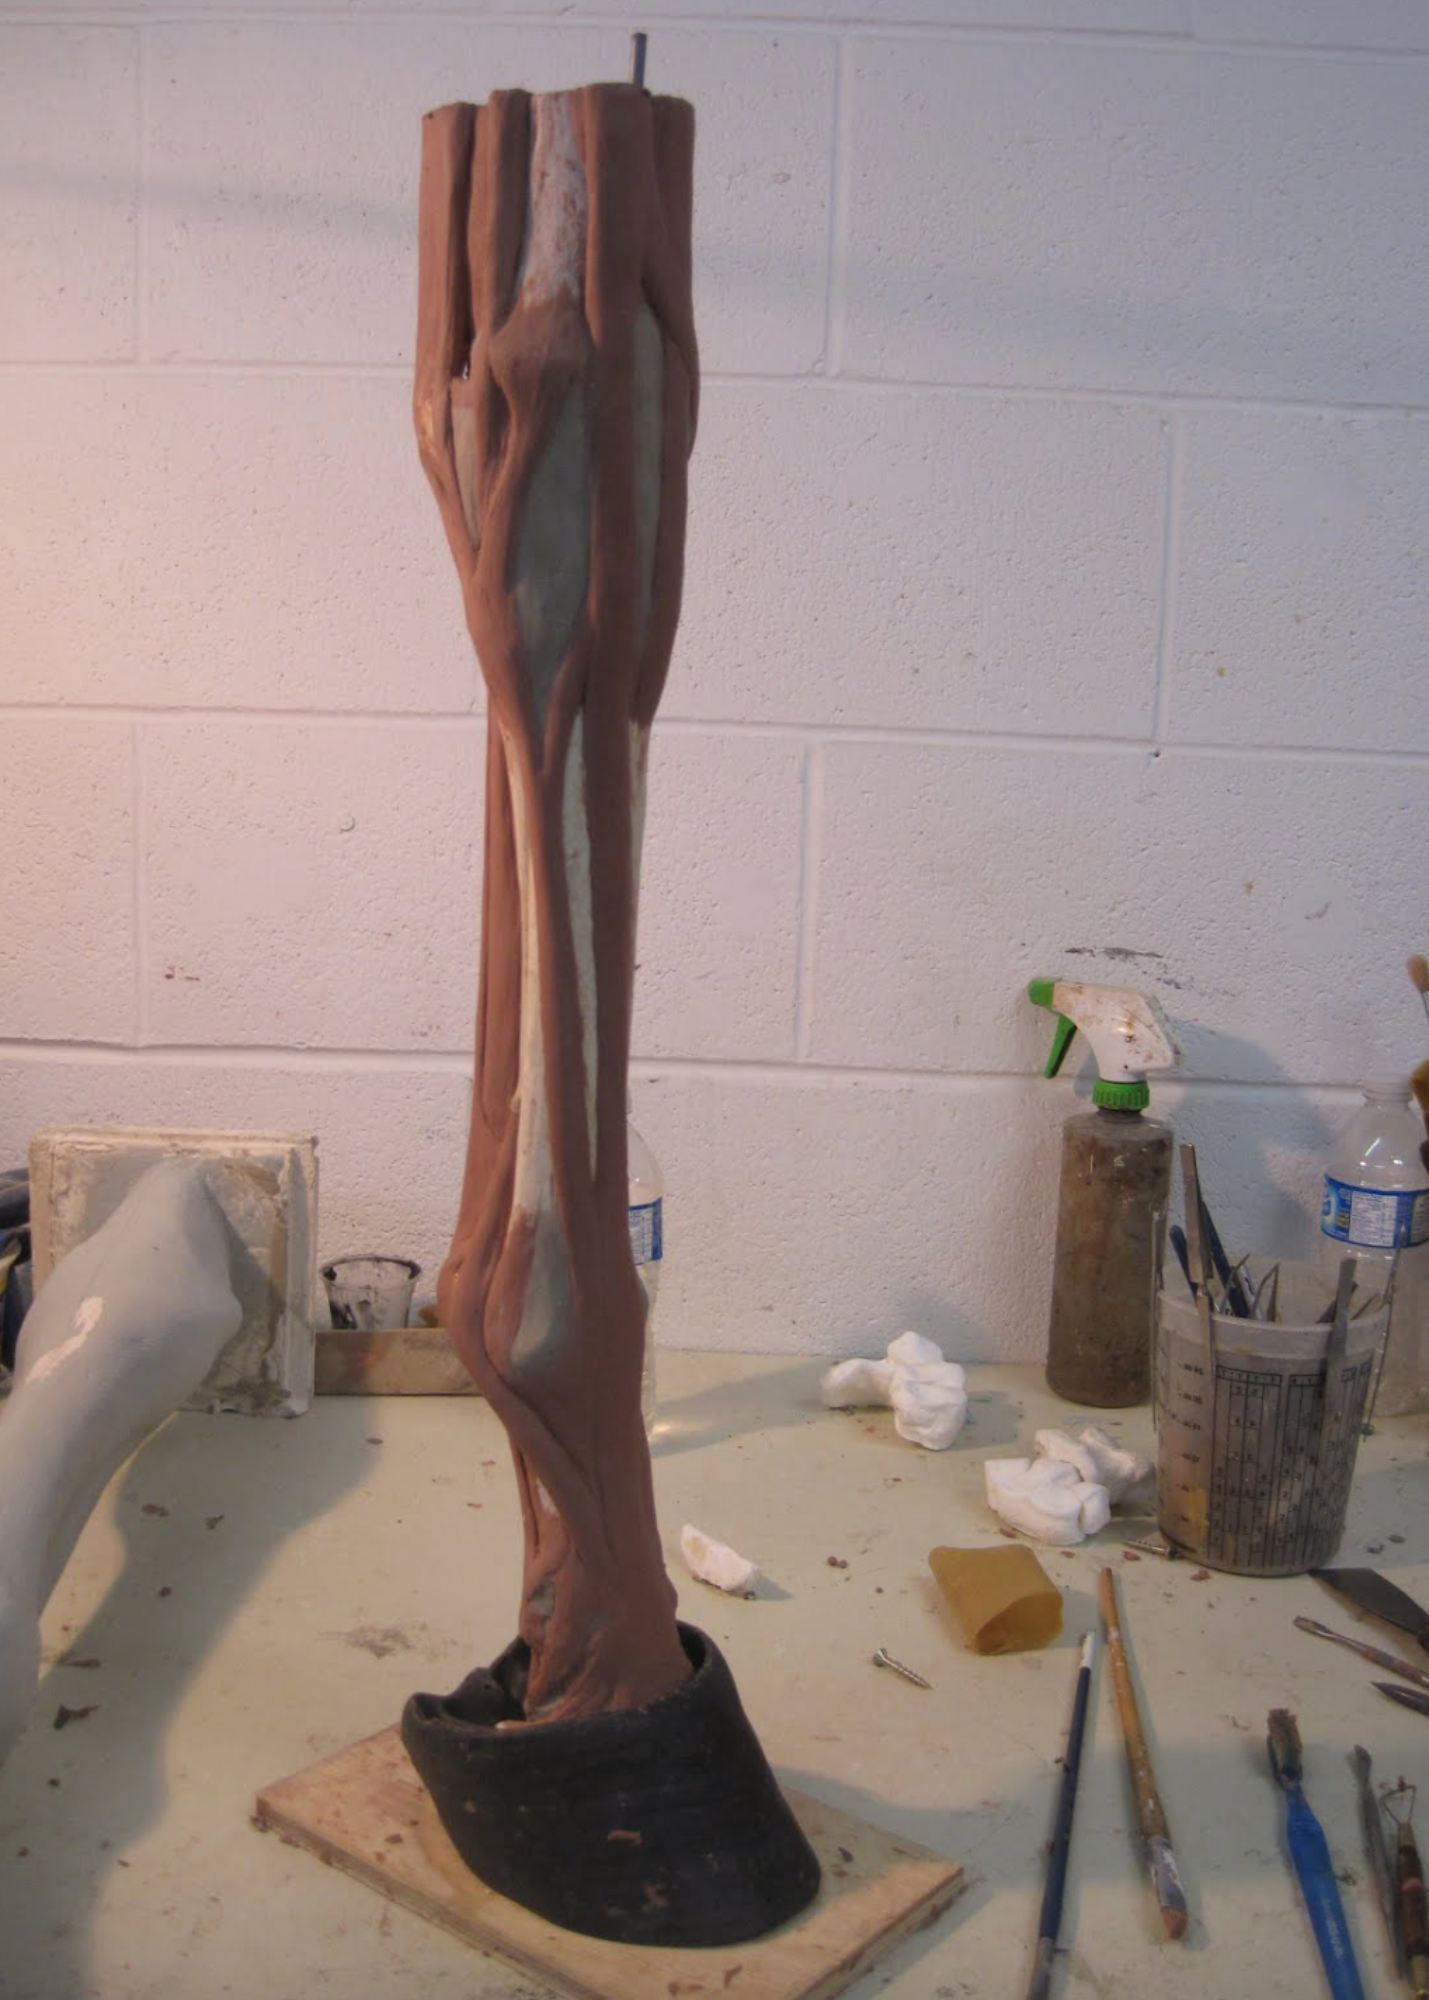 Another view of the equine leg sculpture, tendons and ligaments.